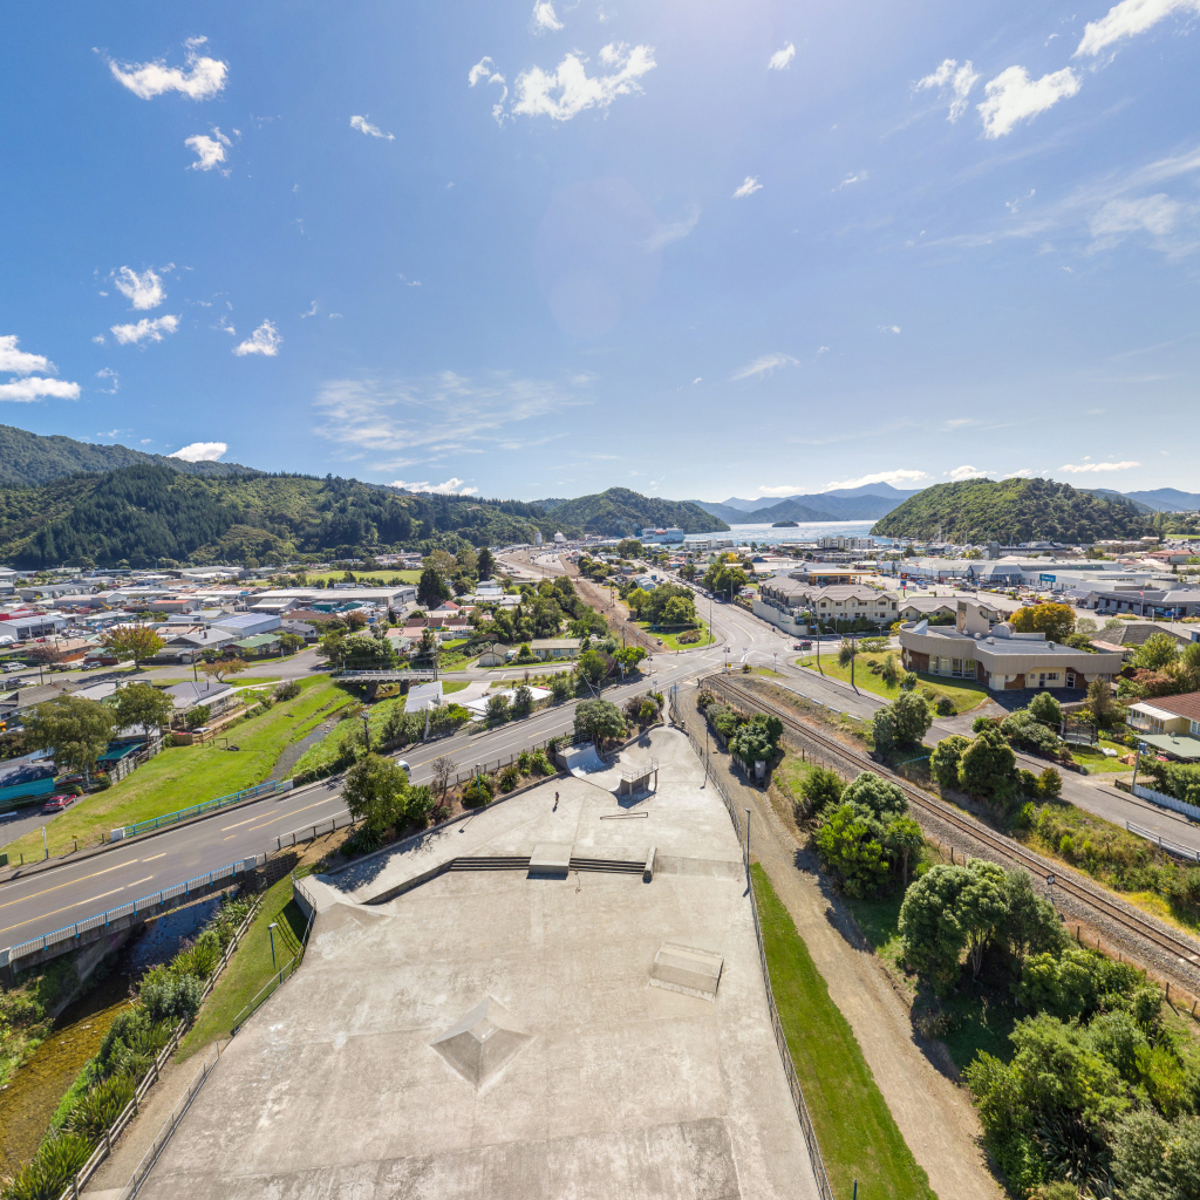 An aerial view of Picton looking towards the port